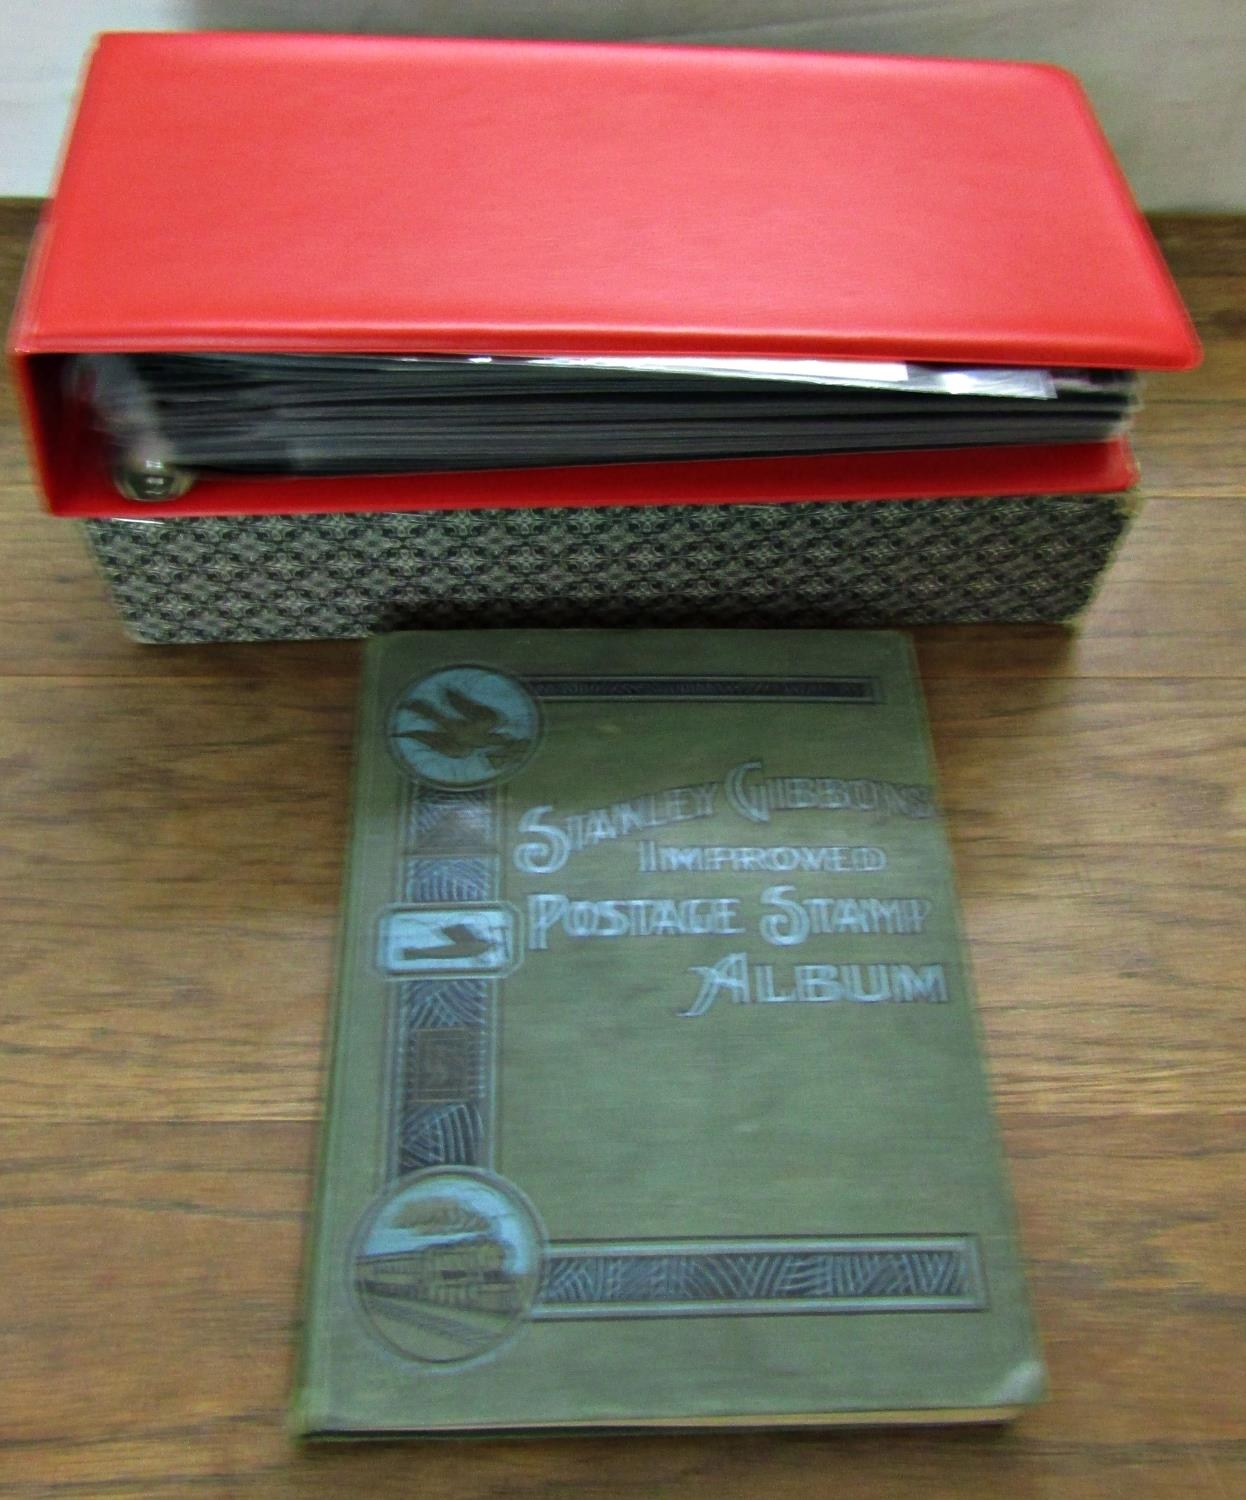 A stamp book containing British and worldwide stamps including a penny red and two penny blue